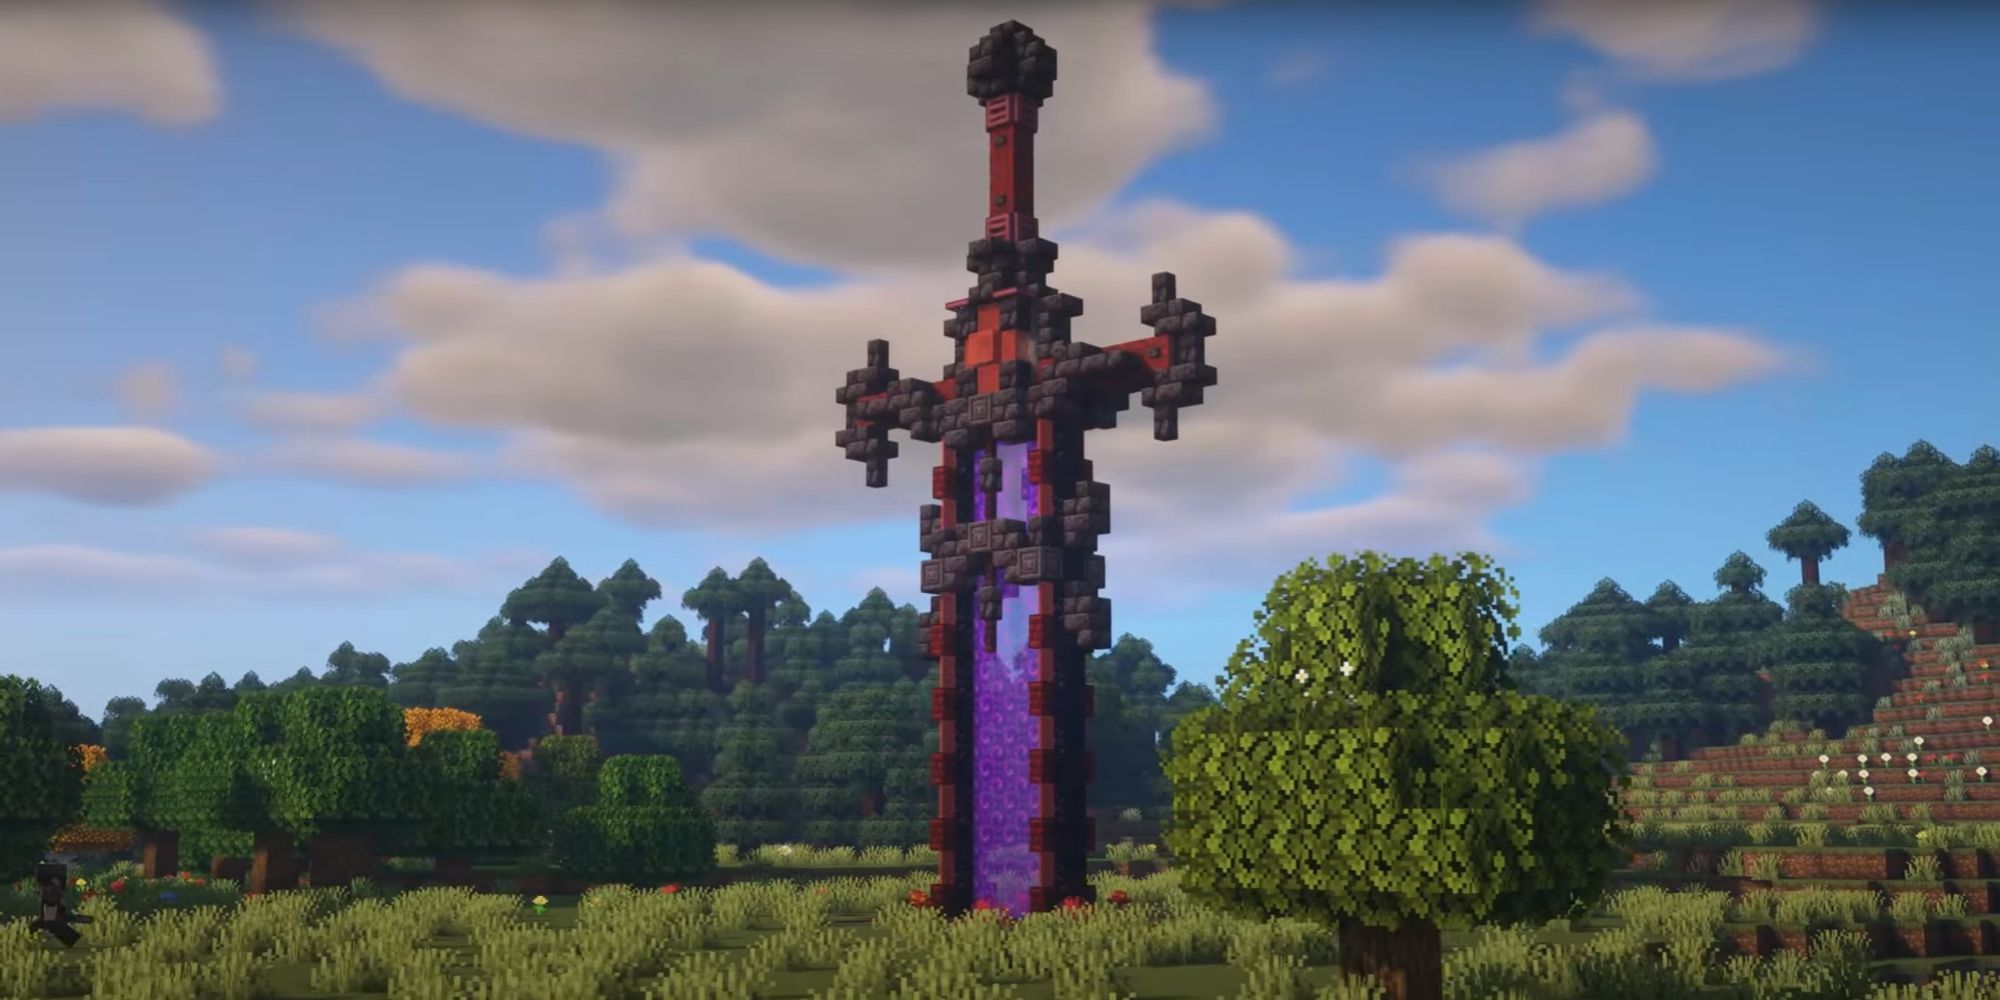 An image from Minecraft of a giant Nether Portal, which is combined with blakcstone to make the portal look like a massive sword thrust into the ground.